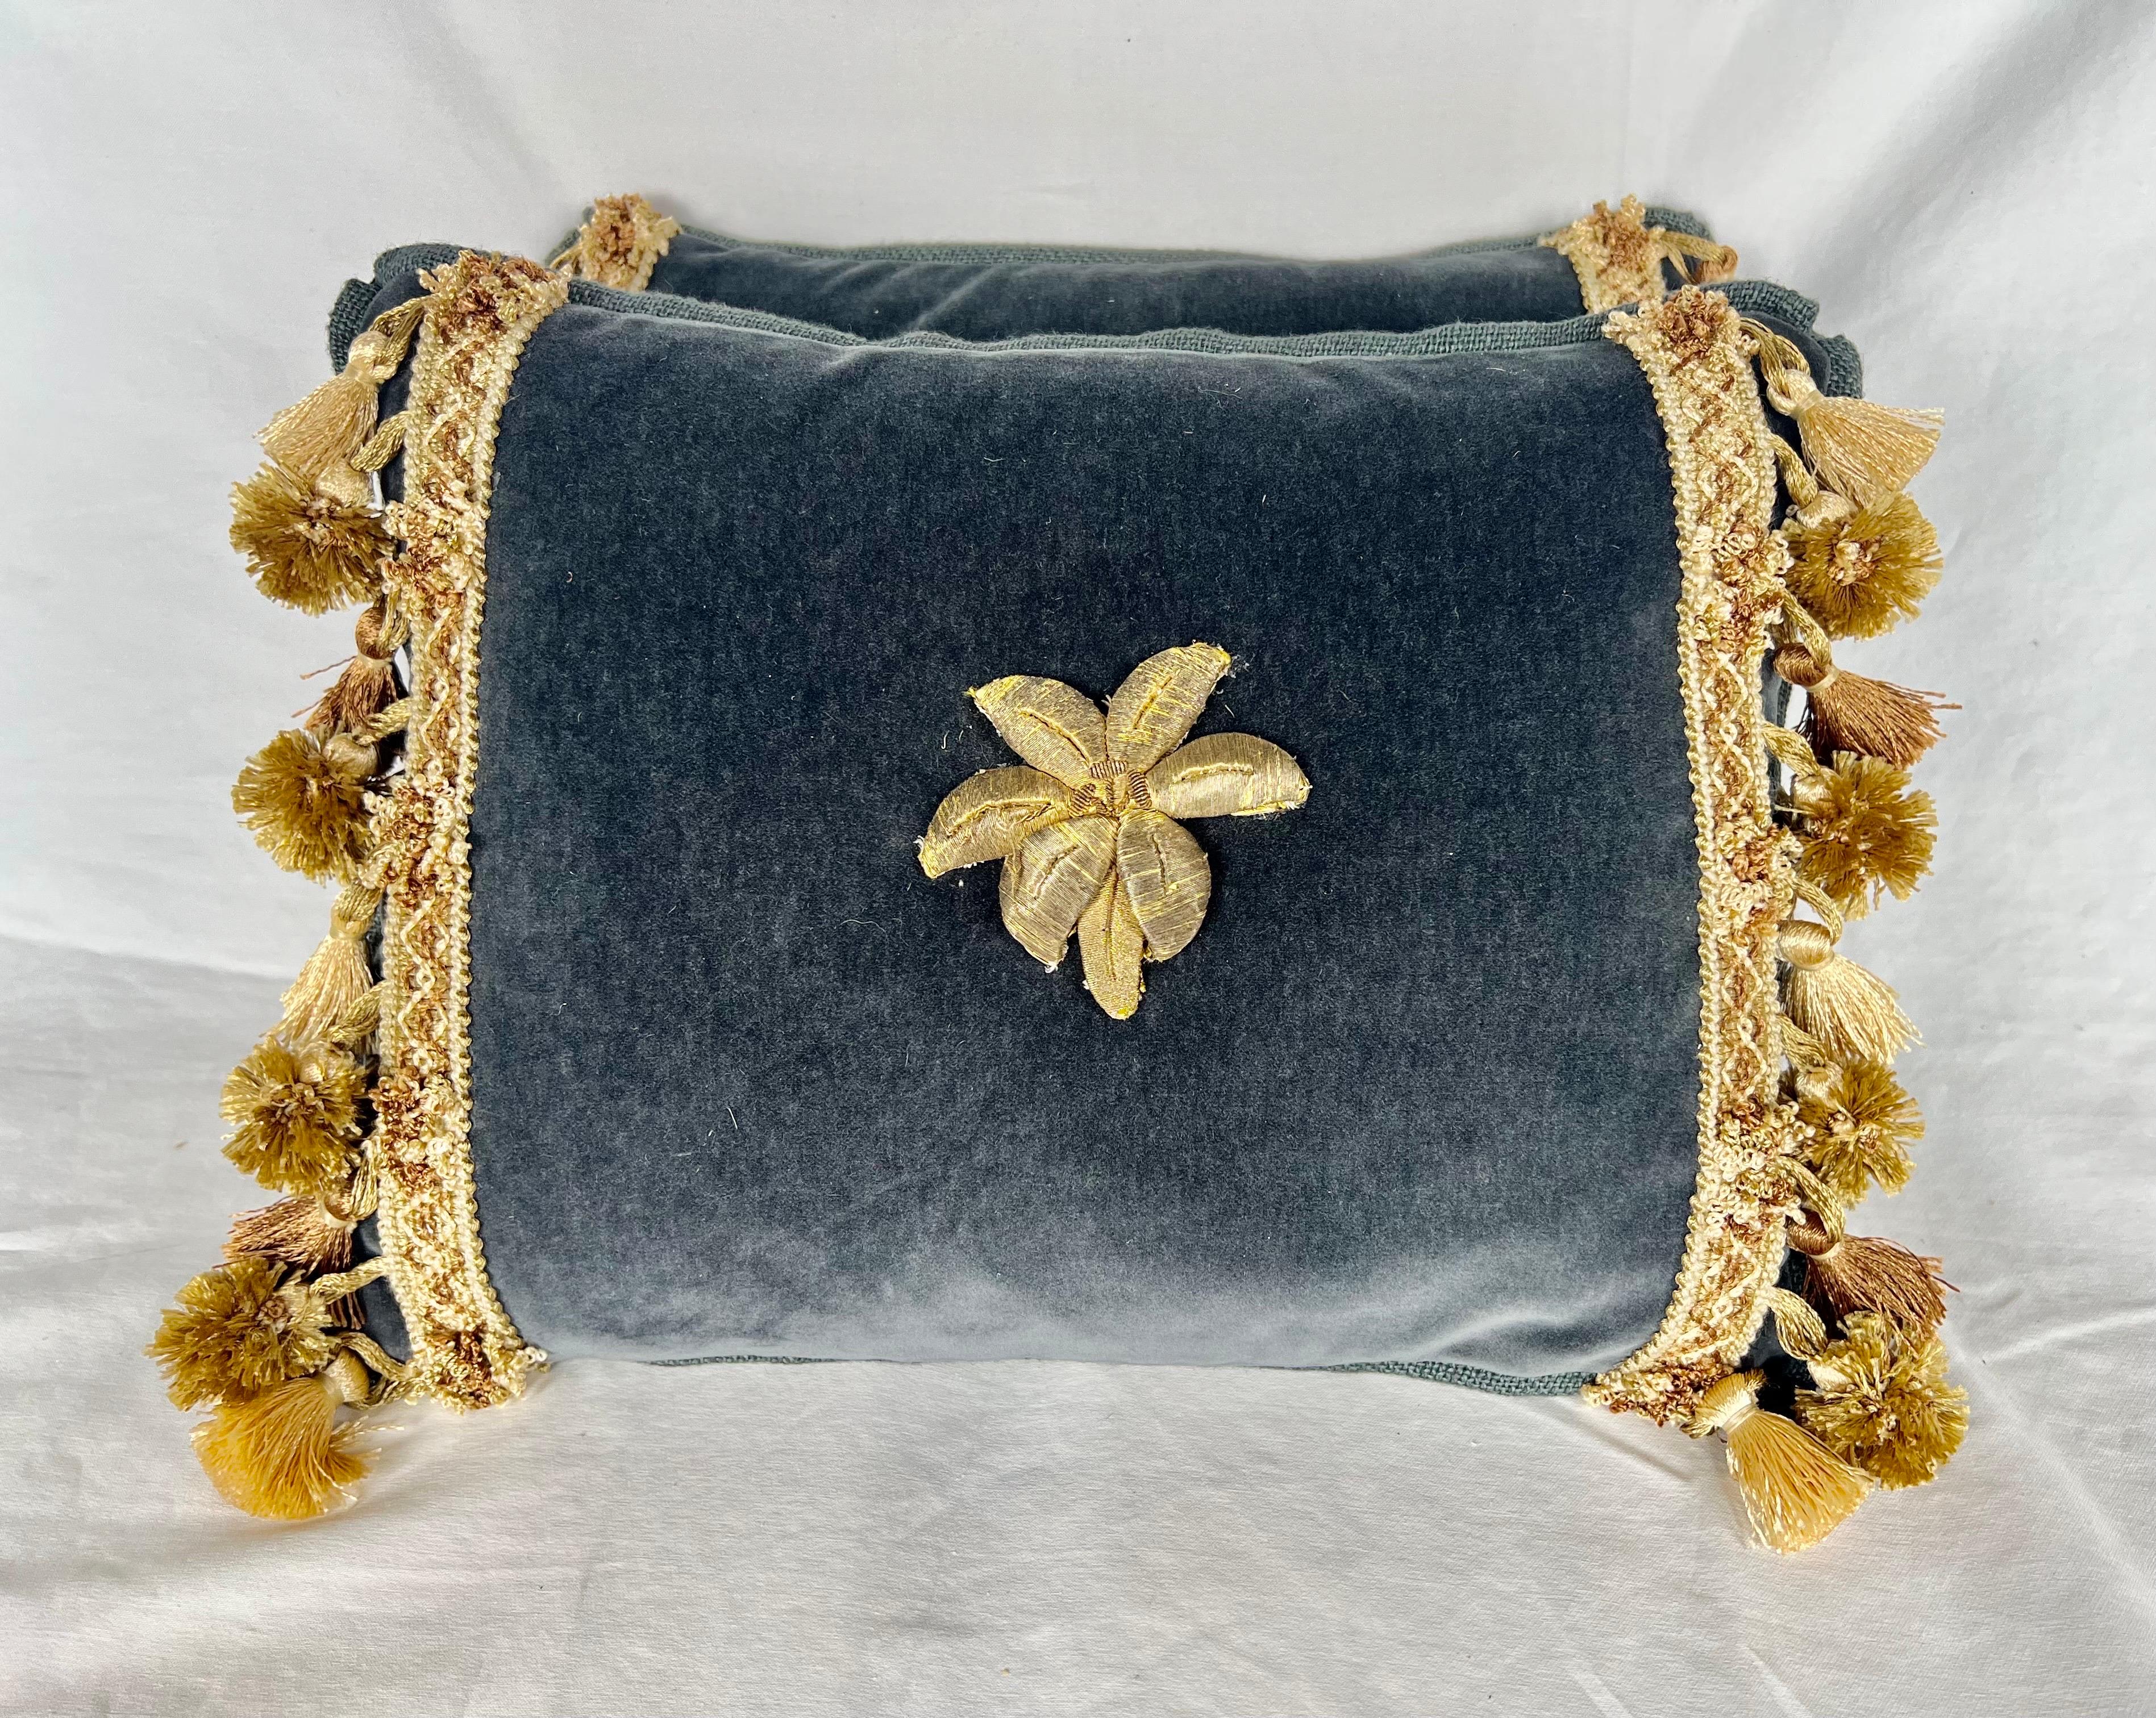 Pair of custom contemporary pillows made with 19th century gold metallic flowers applied to dark blue silk mohair.  Linen backs, down inserts, zipper closures.